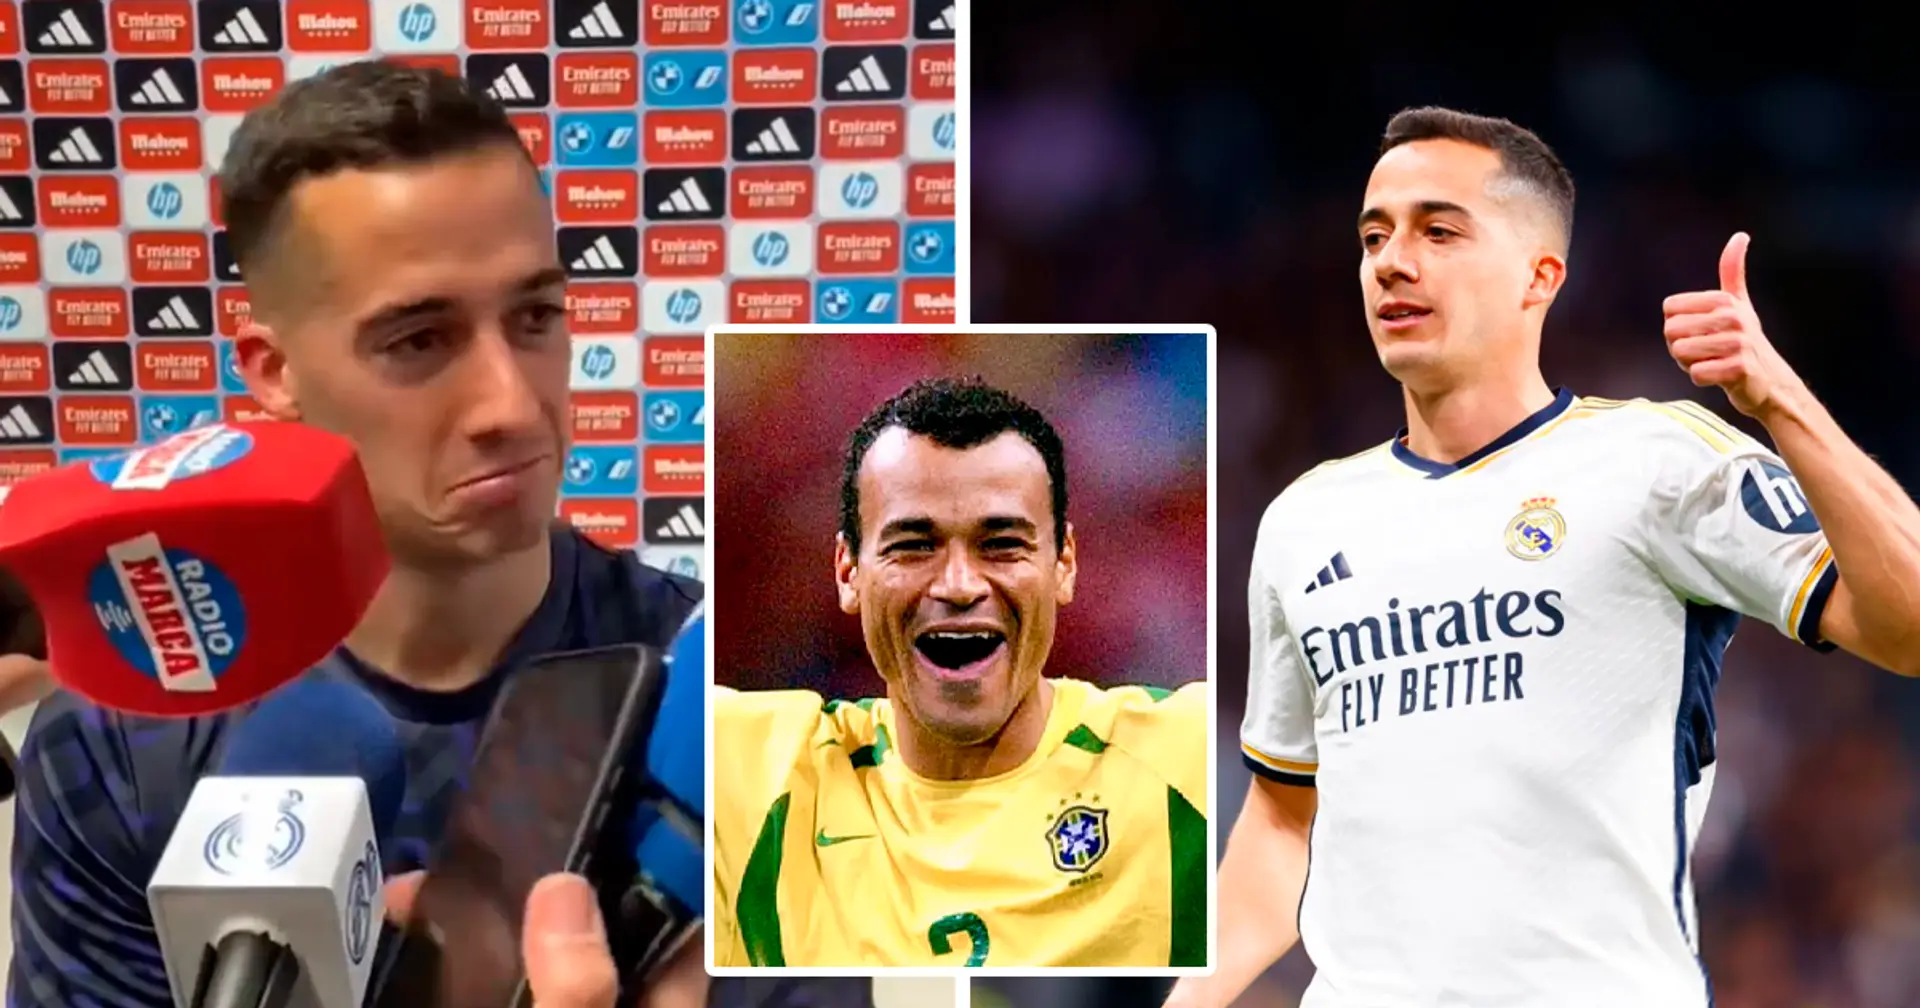 What Lucas Vazquez thinks about his new nickname ‘Cafucas’ - revealed